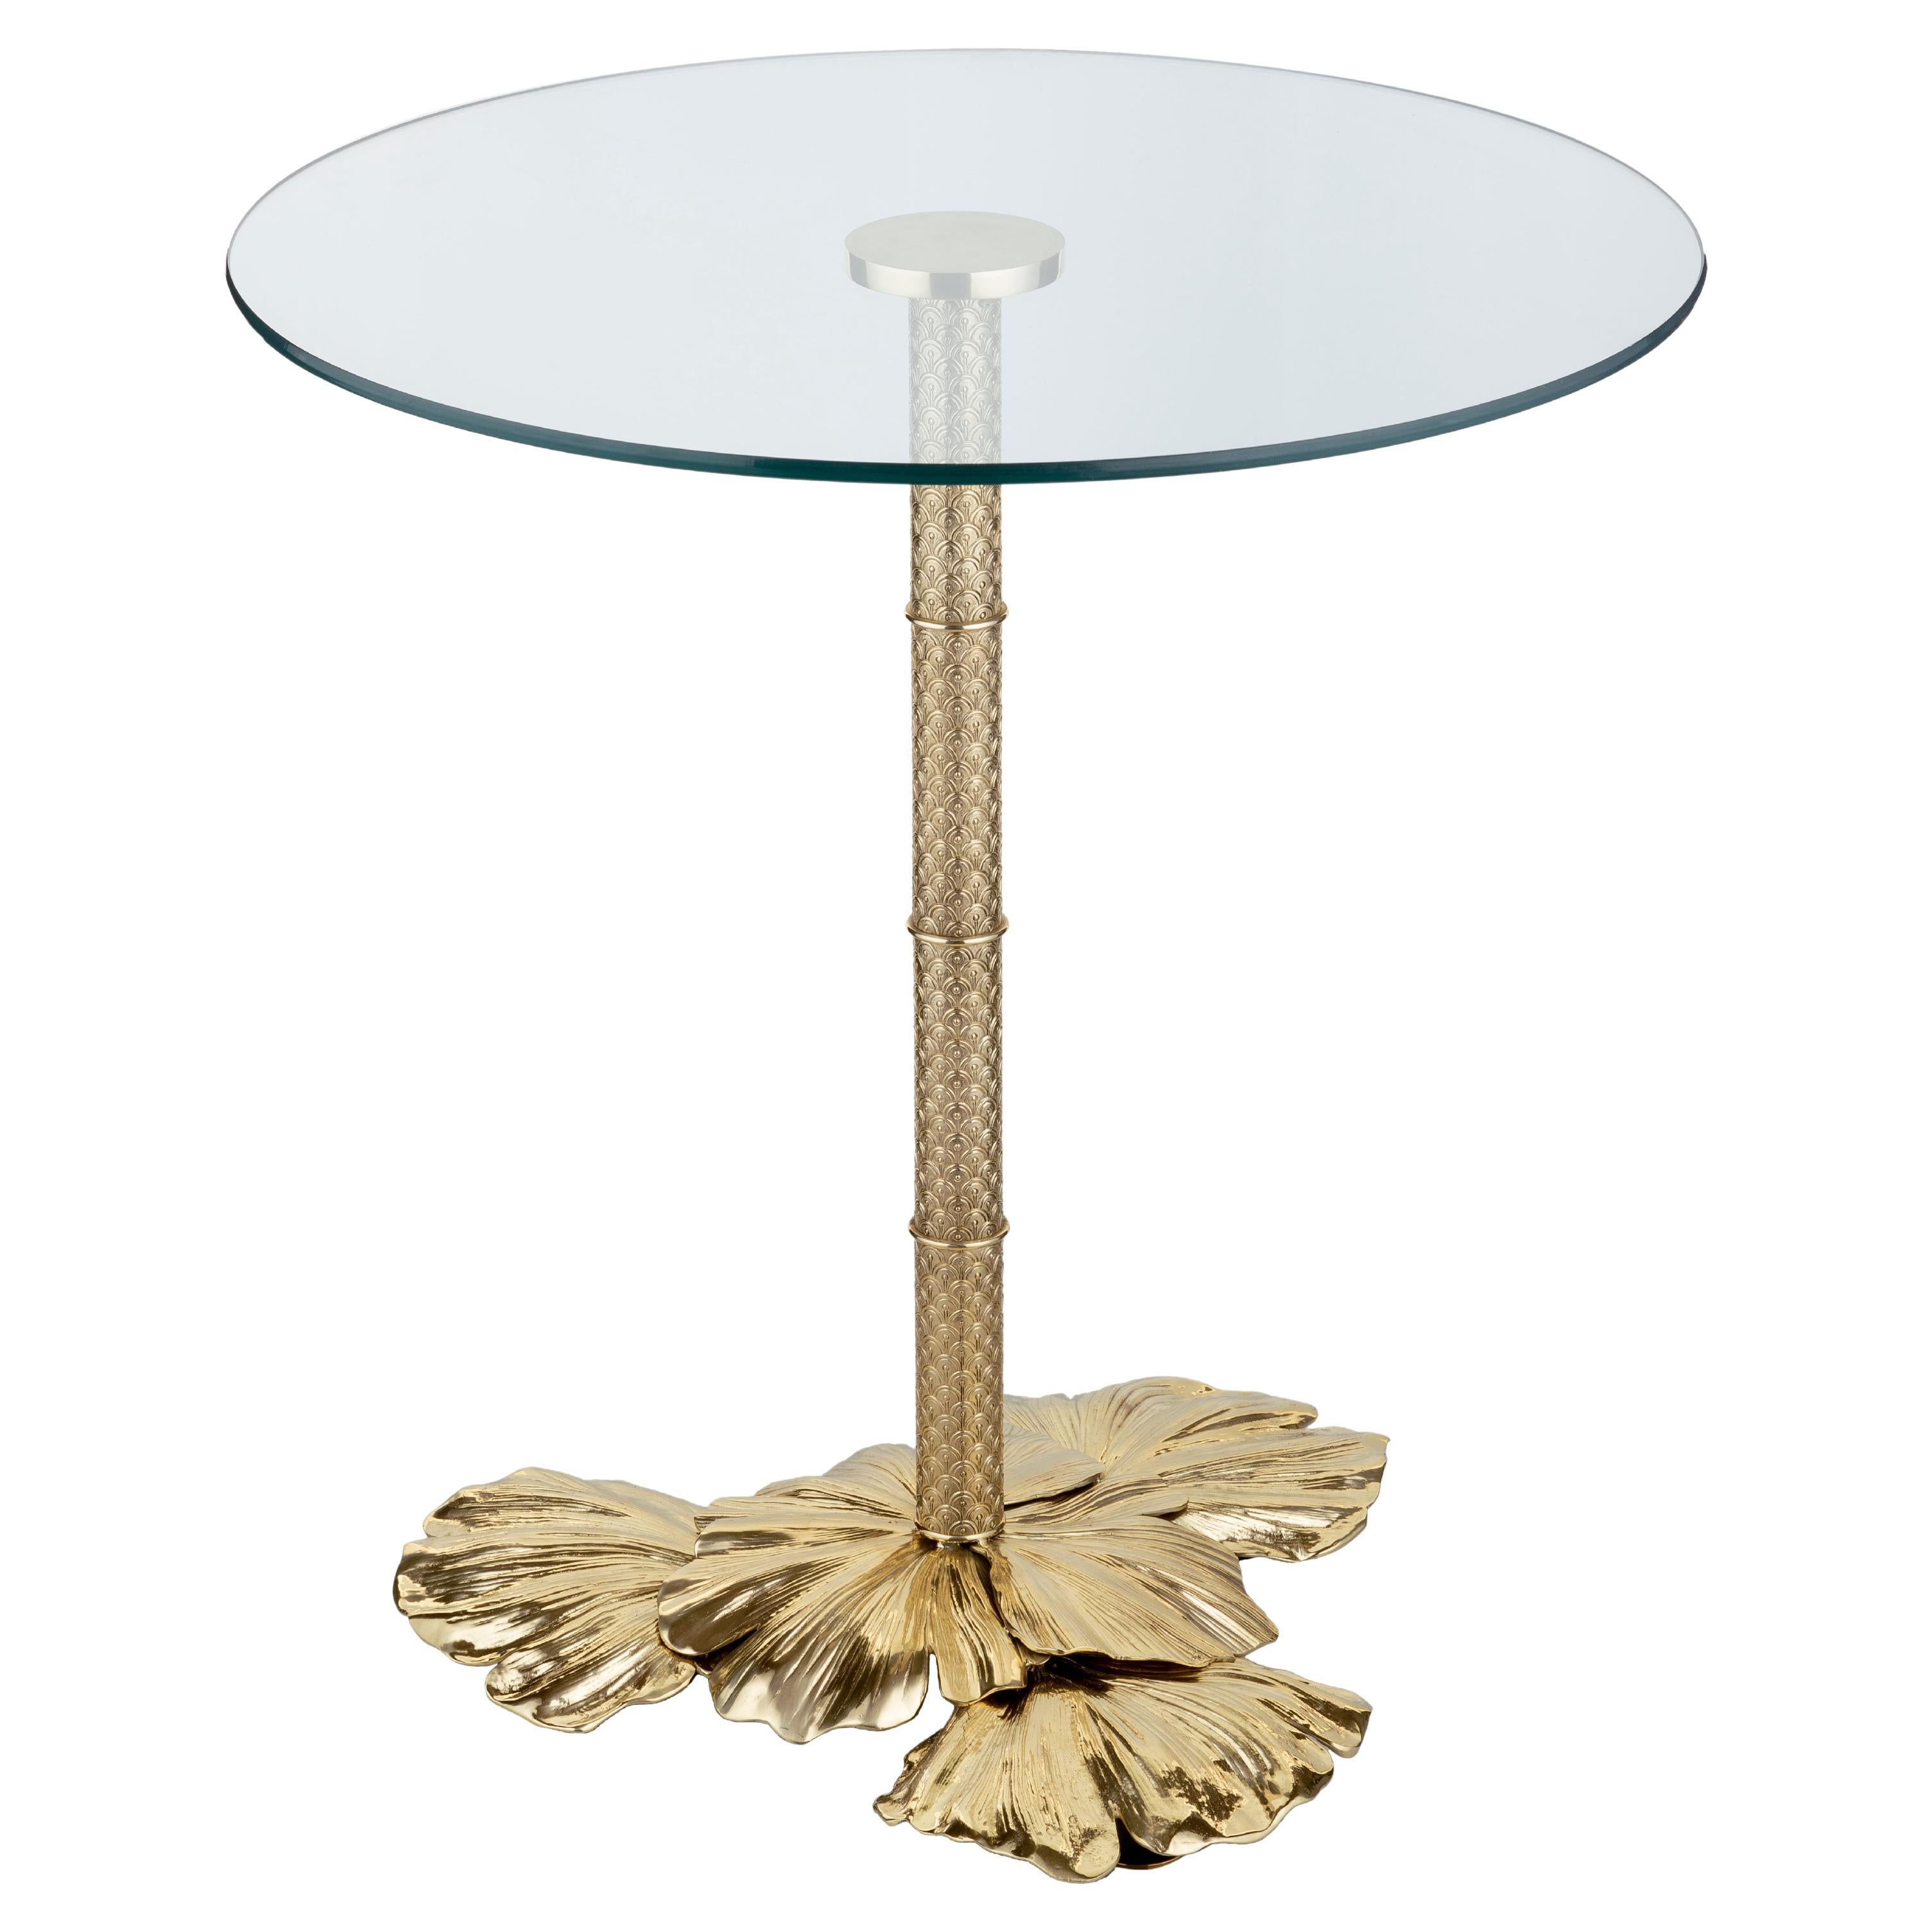 Ginkgo Biloba Side Table with Casting Brass Structure and Clear Glass Table Top